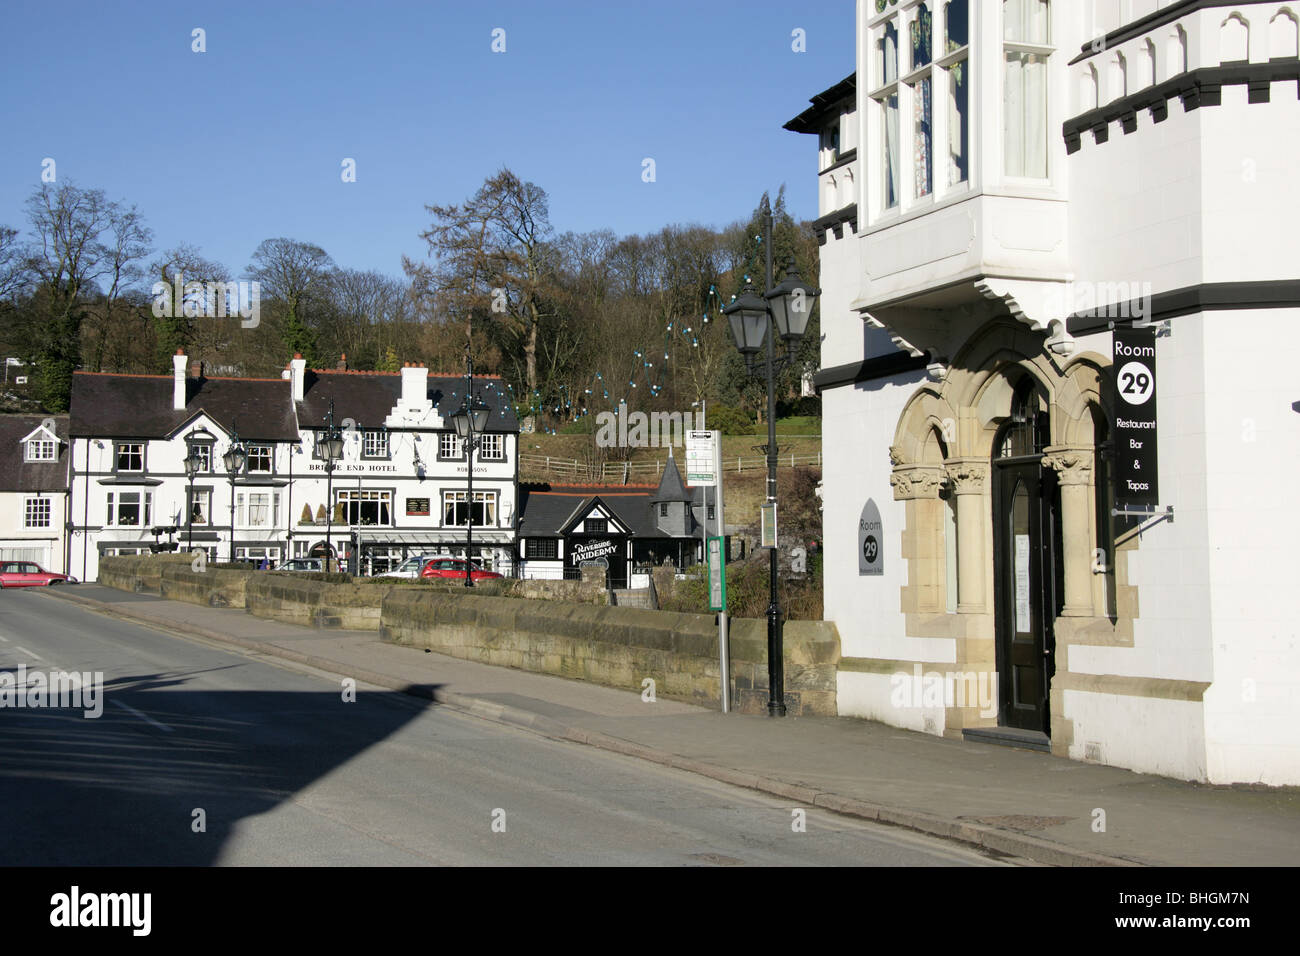 The town of Llangollen, Wales. Room 29 bar and restaurant of the Royal Hotel at the 14th century Llangollen Bridge. Stock Photo